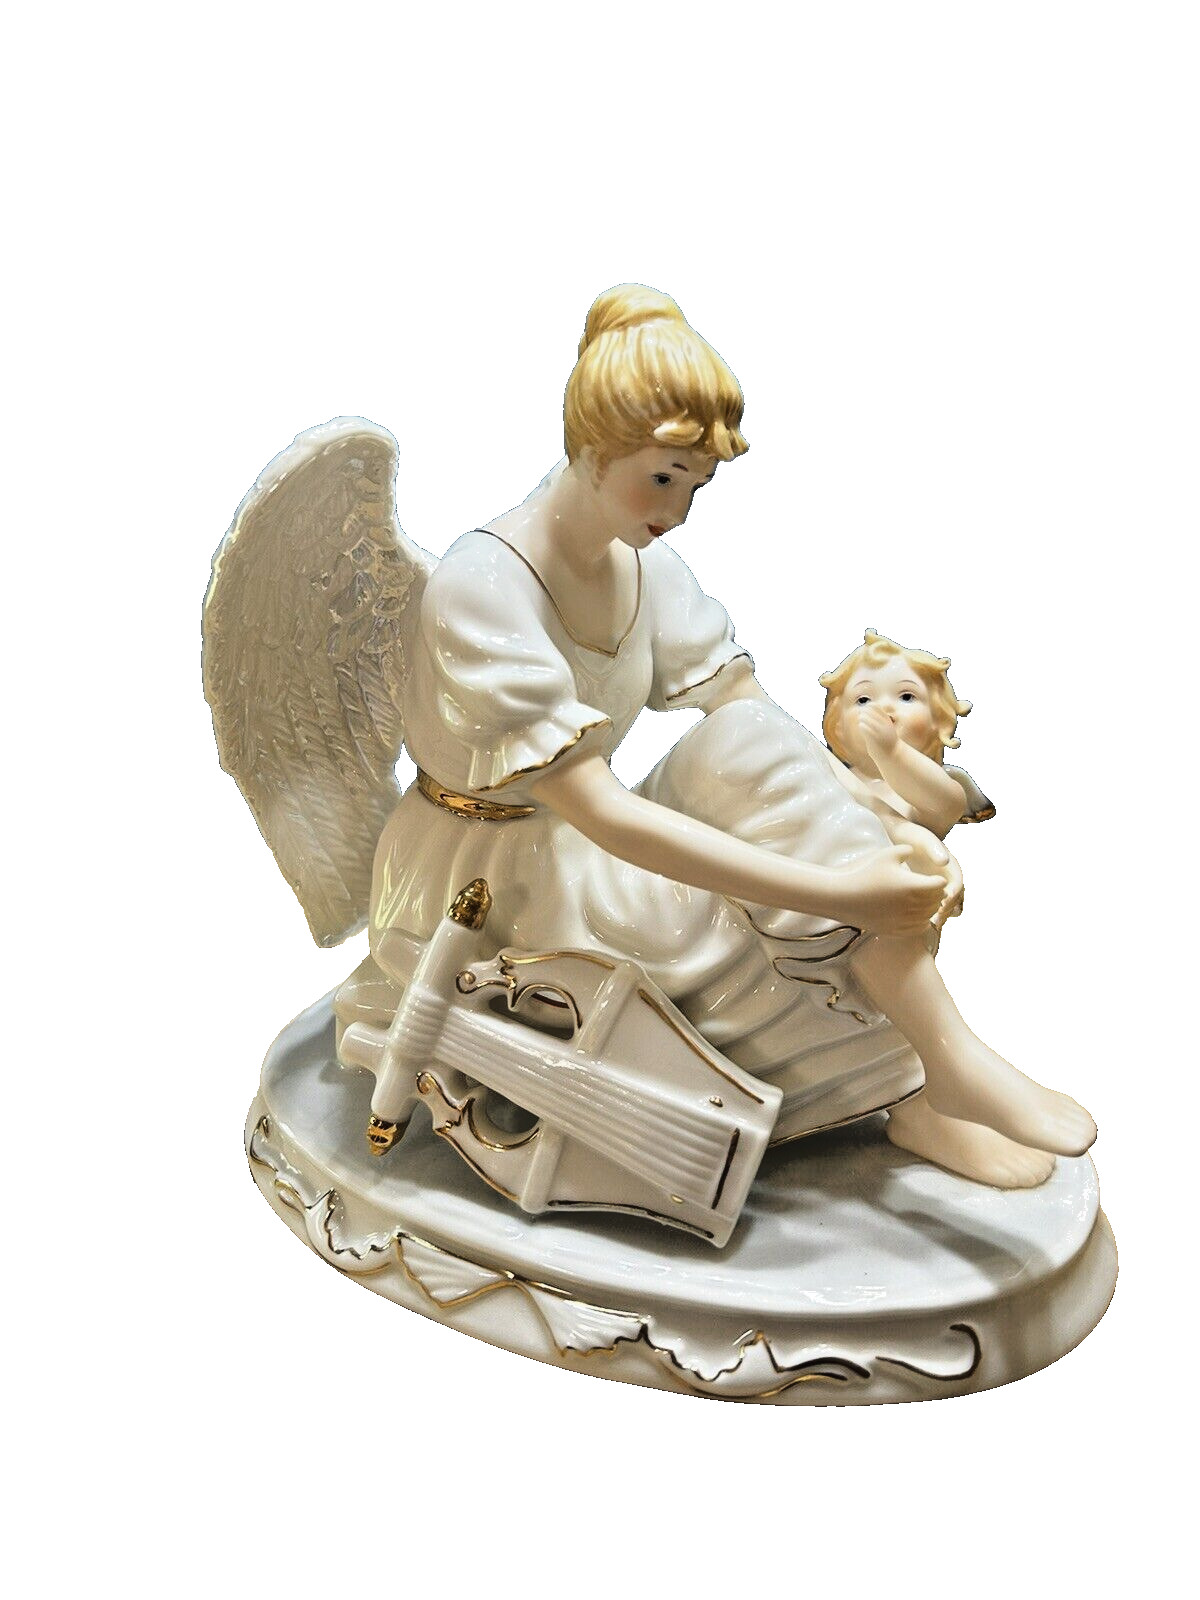 Mark O'Well ~ Vintage Porcelain Angel ~ With Harp and Cherub